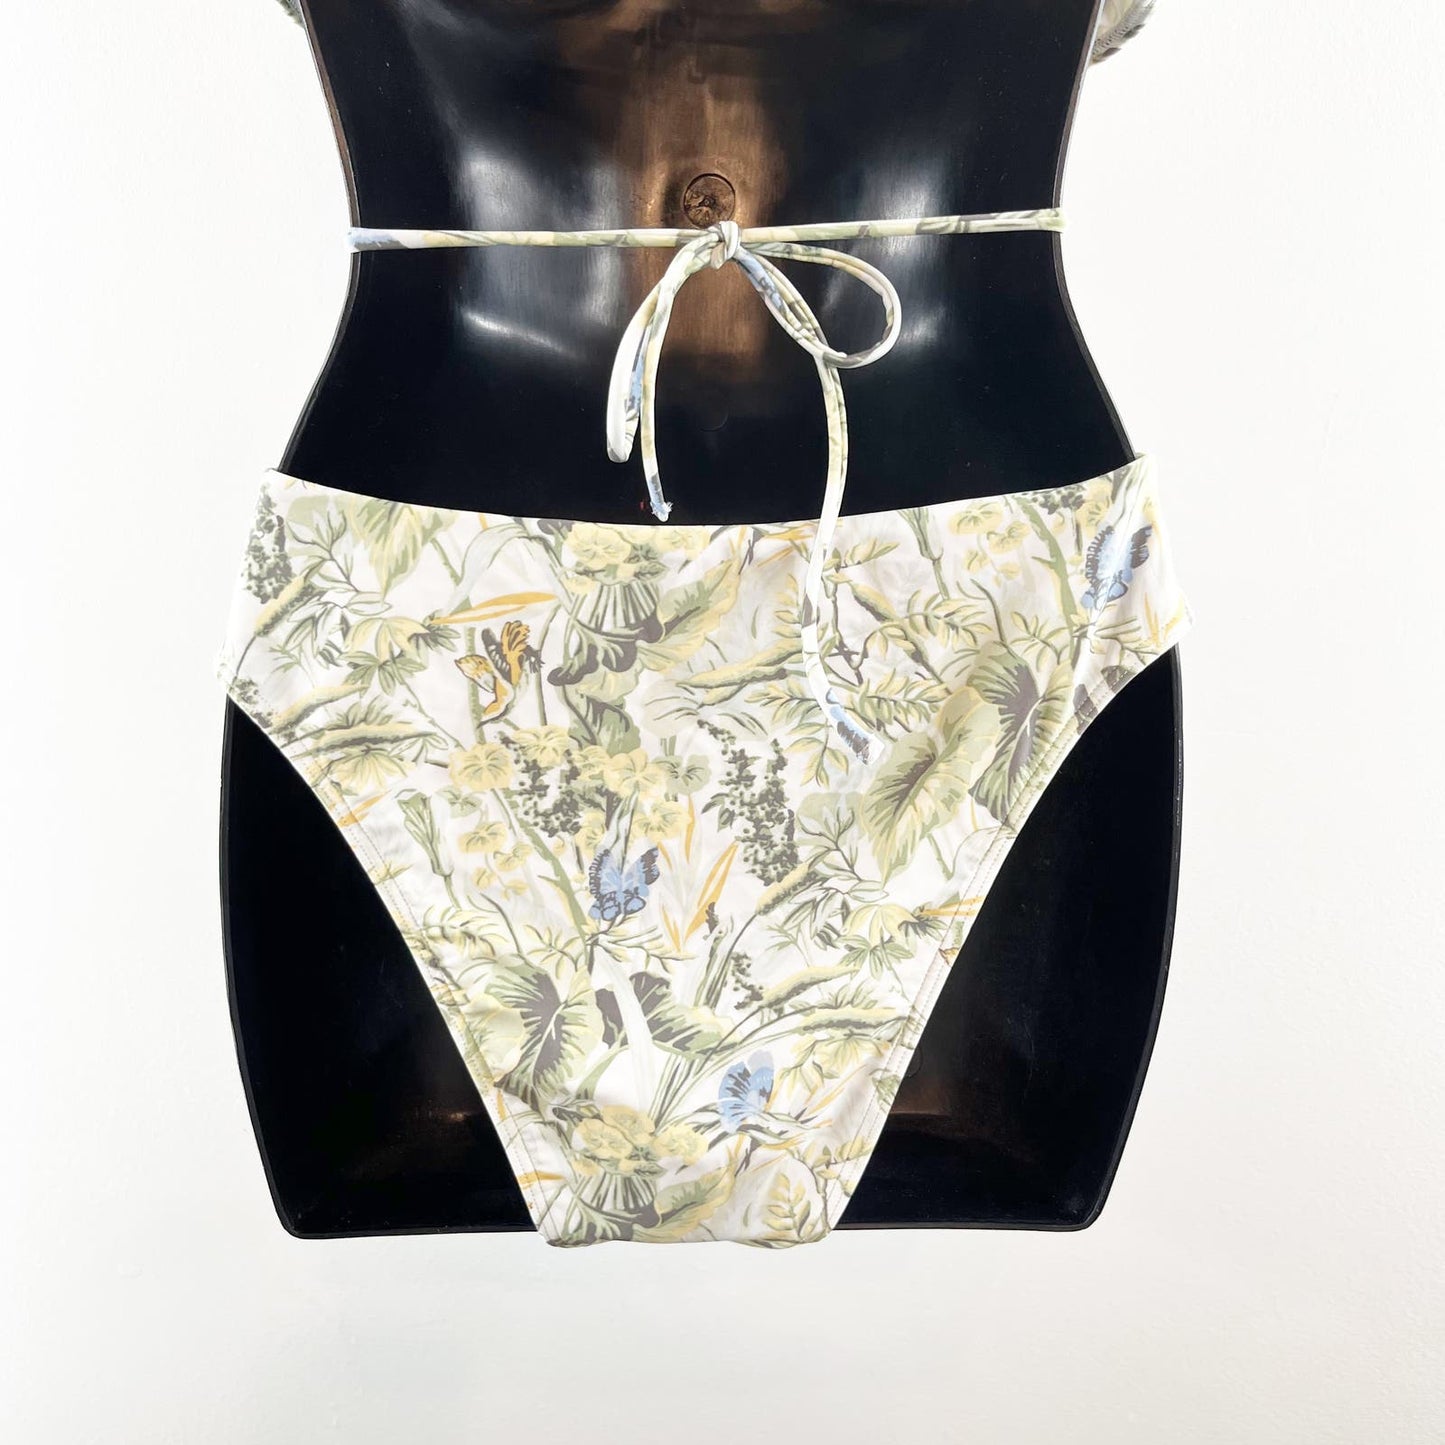 Abercrombie & Fitch Cinched Bandeau Top High Waist Bottom Bikini White Floral M